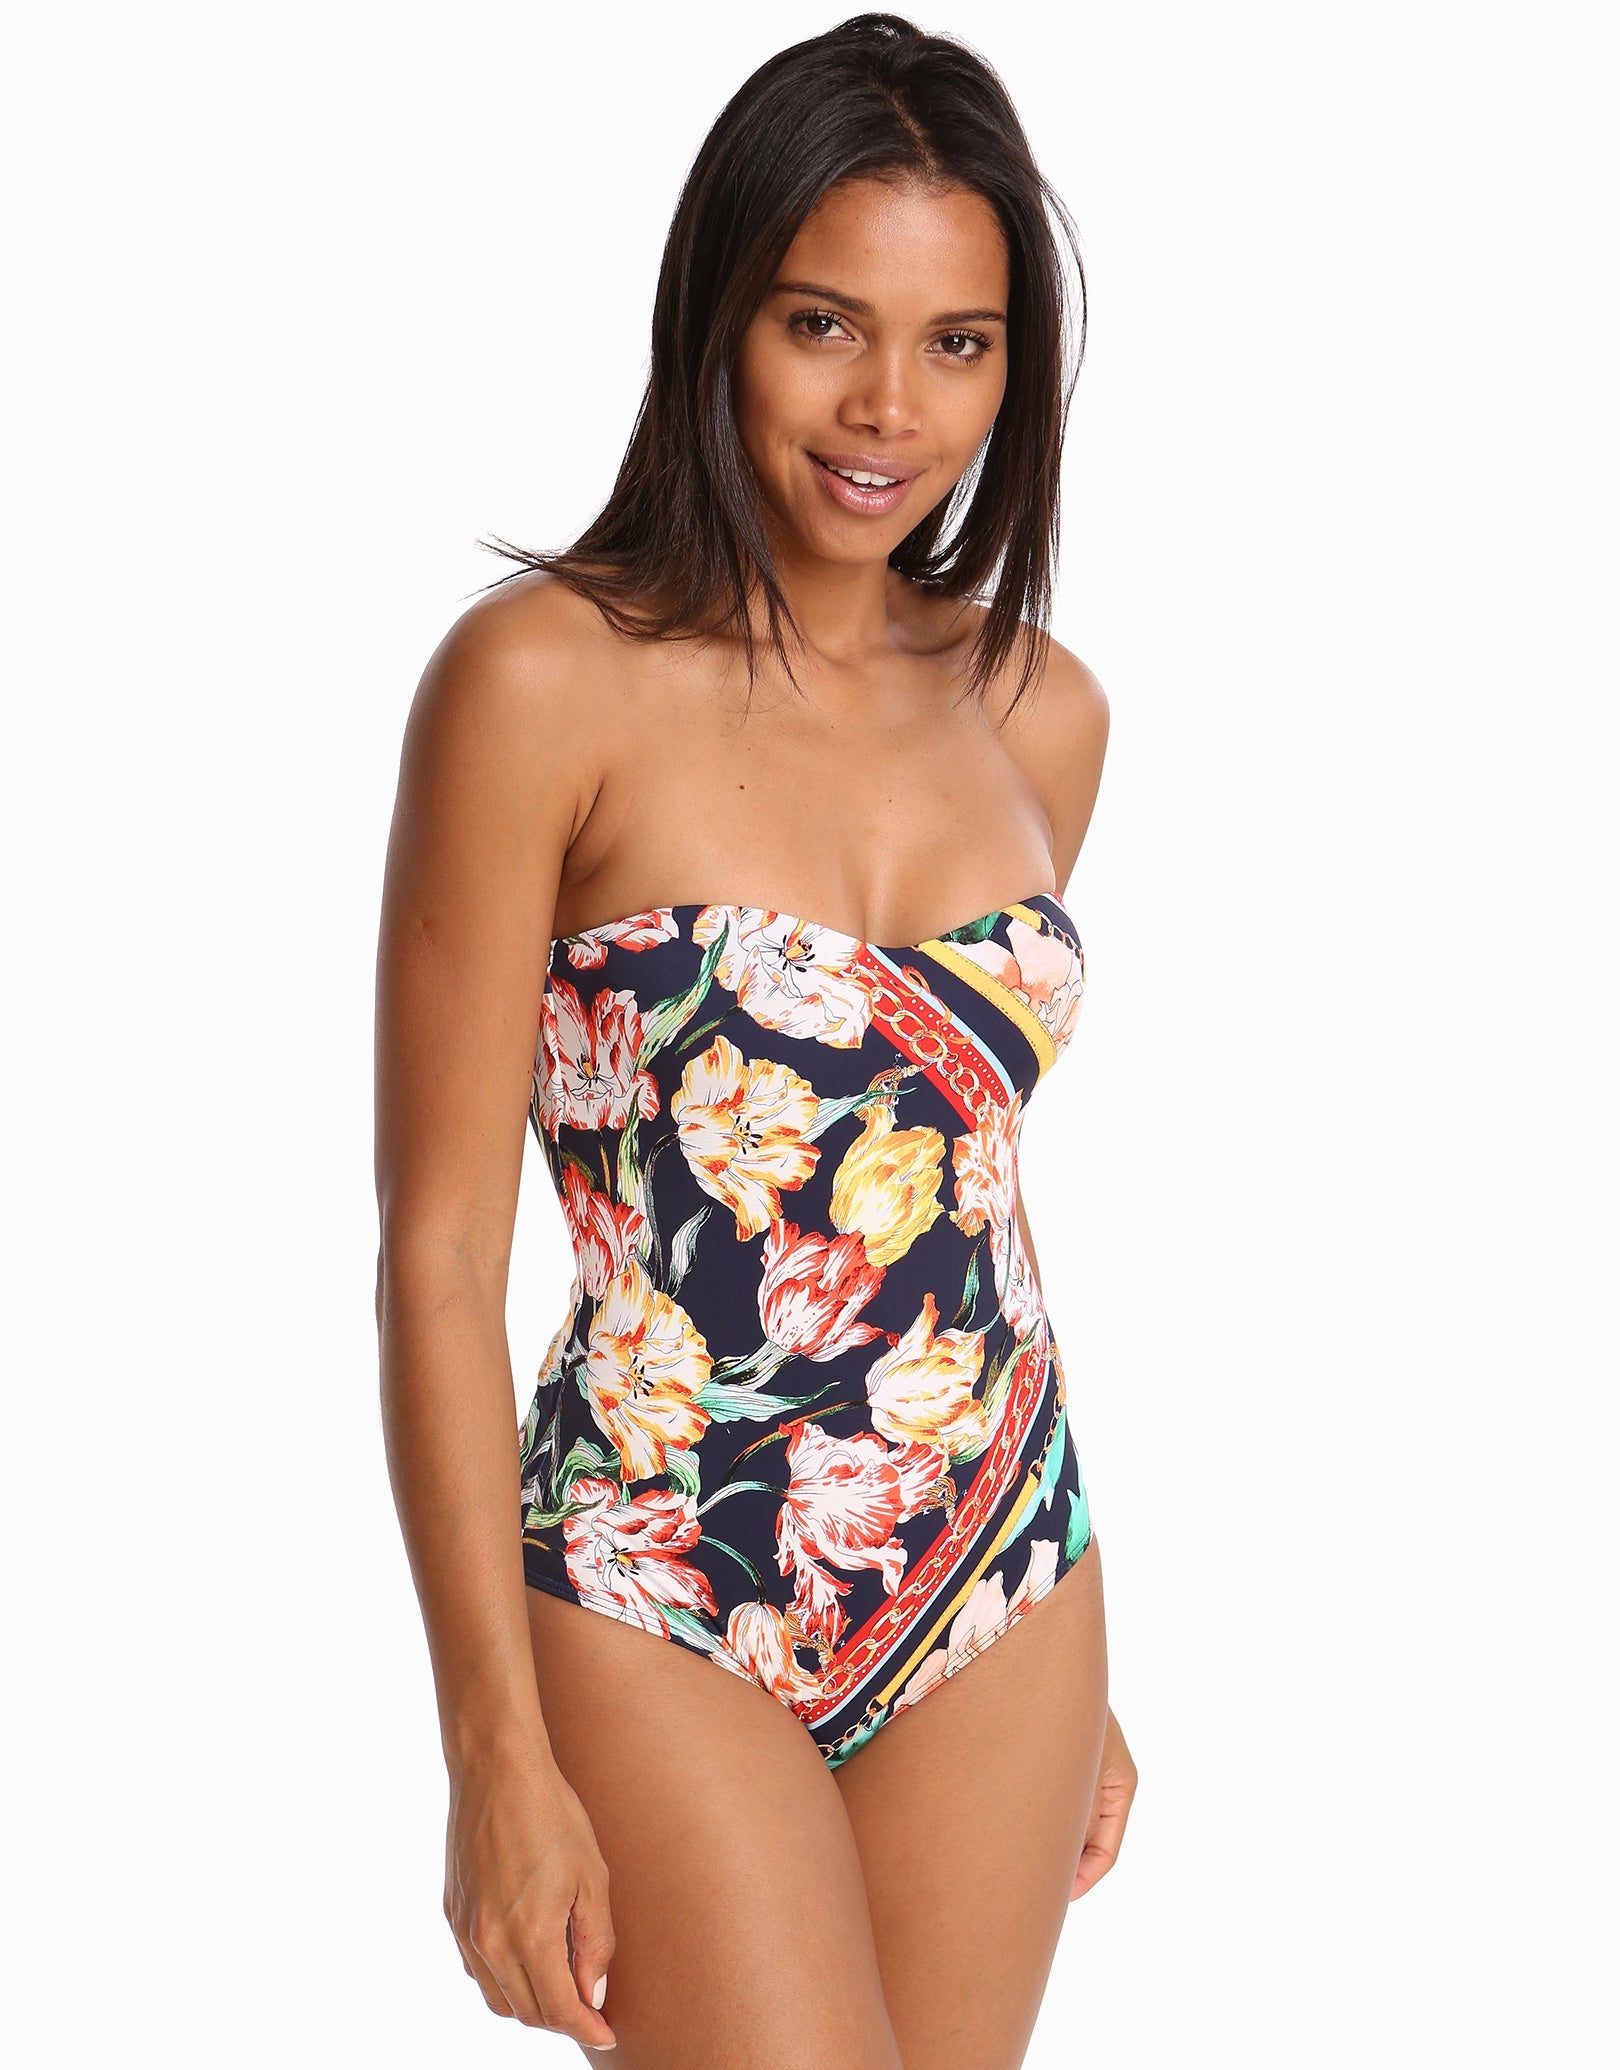 Jets Galleria Bandeau Swimsuit - Ink